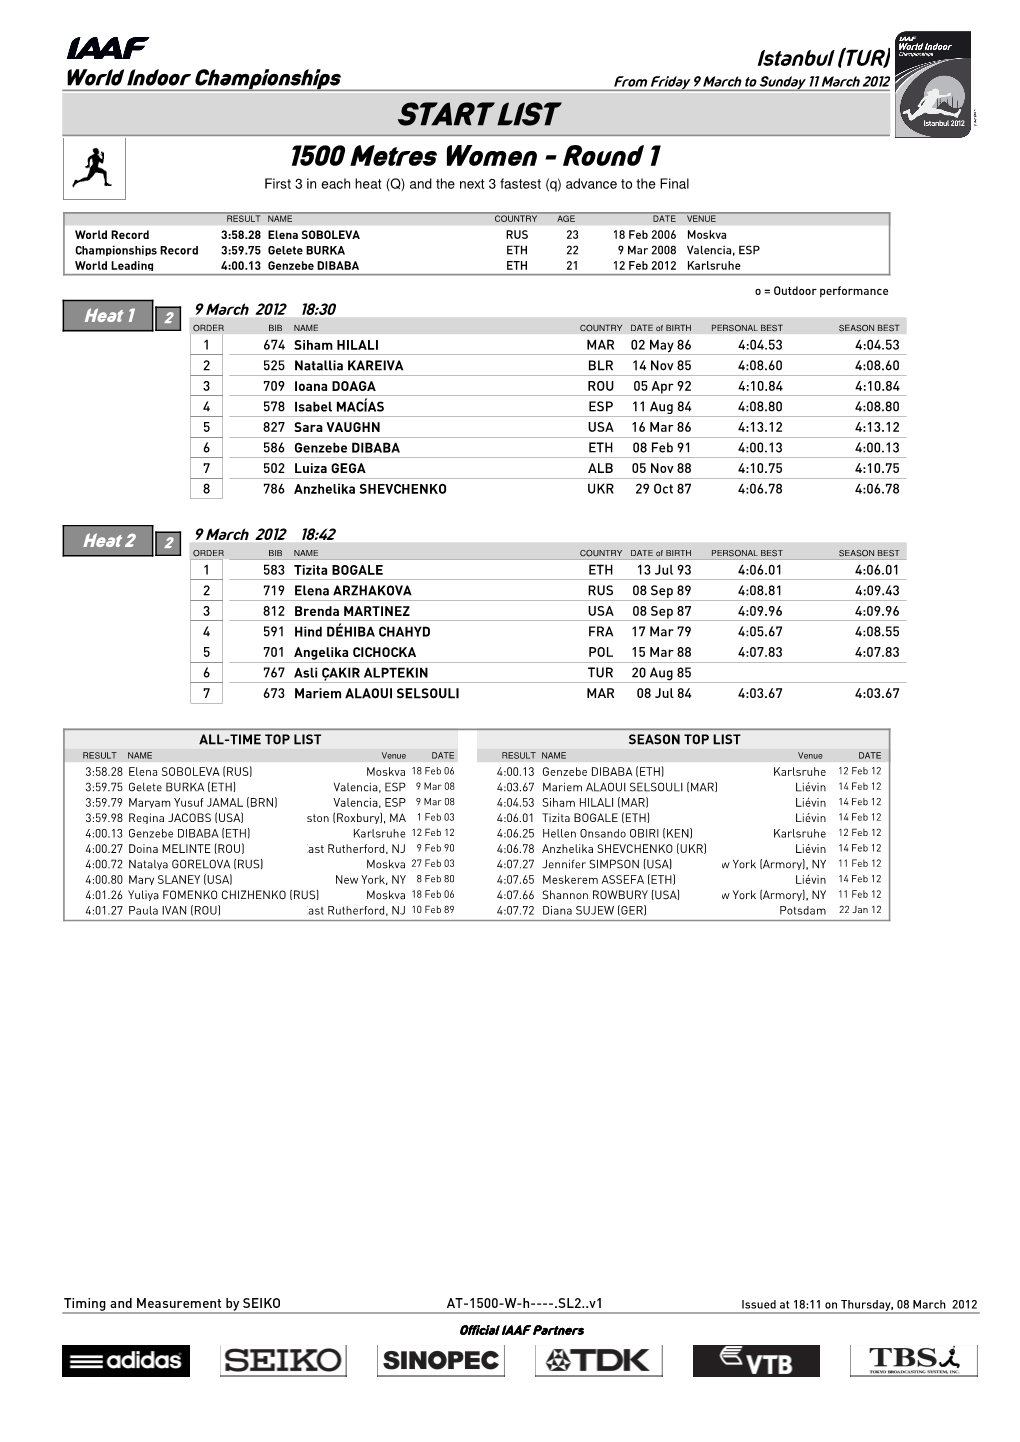 START LIST 1500 Metres Women - Round 1 First 3 in Each Heat (Q) and the Next 3 Fastest (Q) Advance to the Final